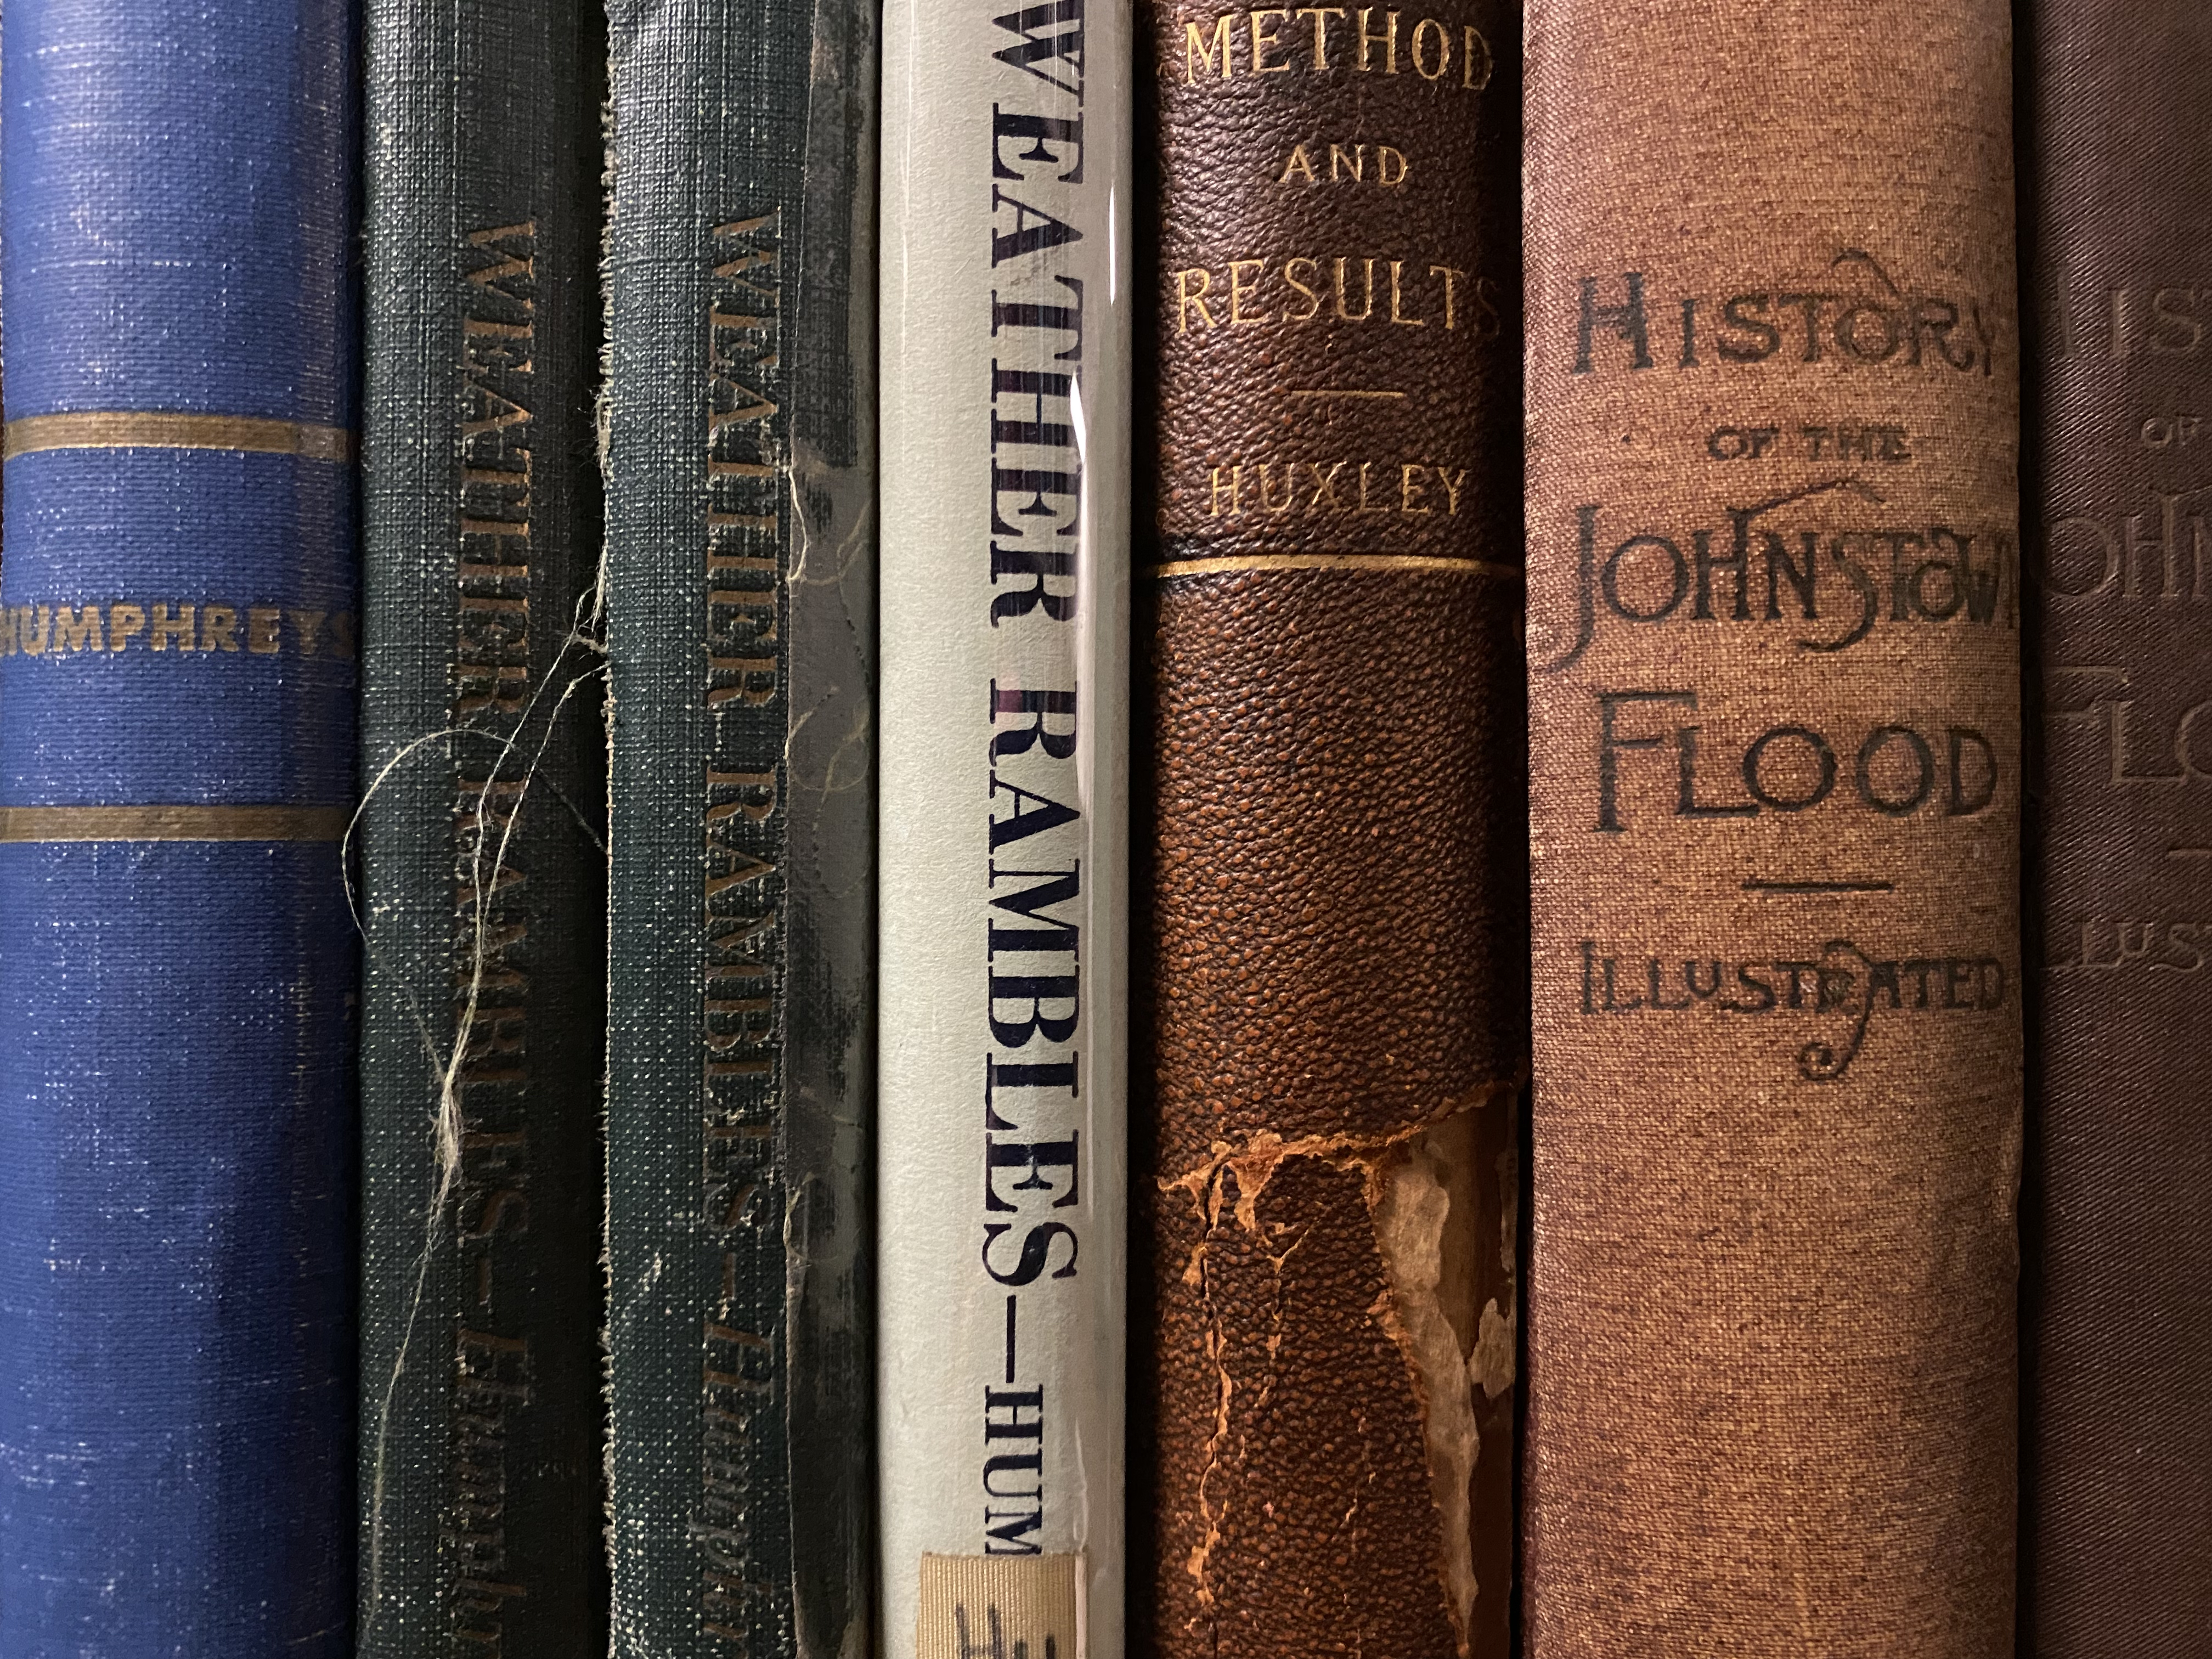 Photo of shelf of books with spines visible (10th and 19th century volumes)